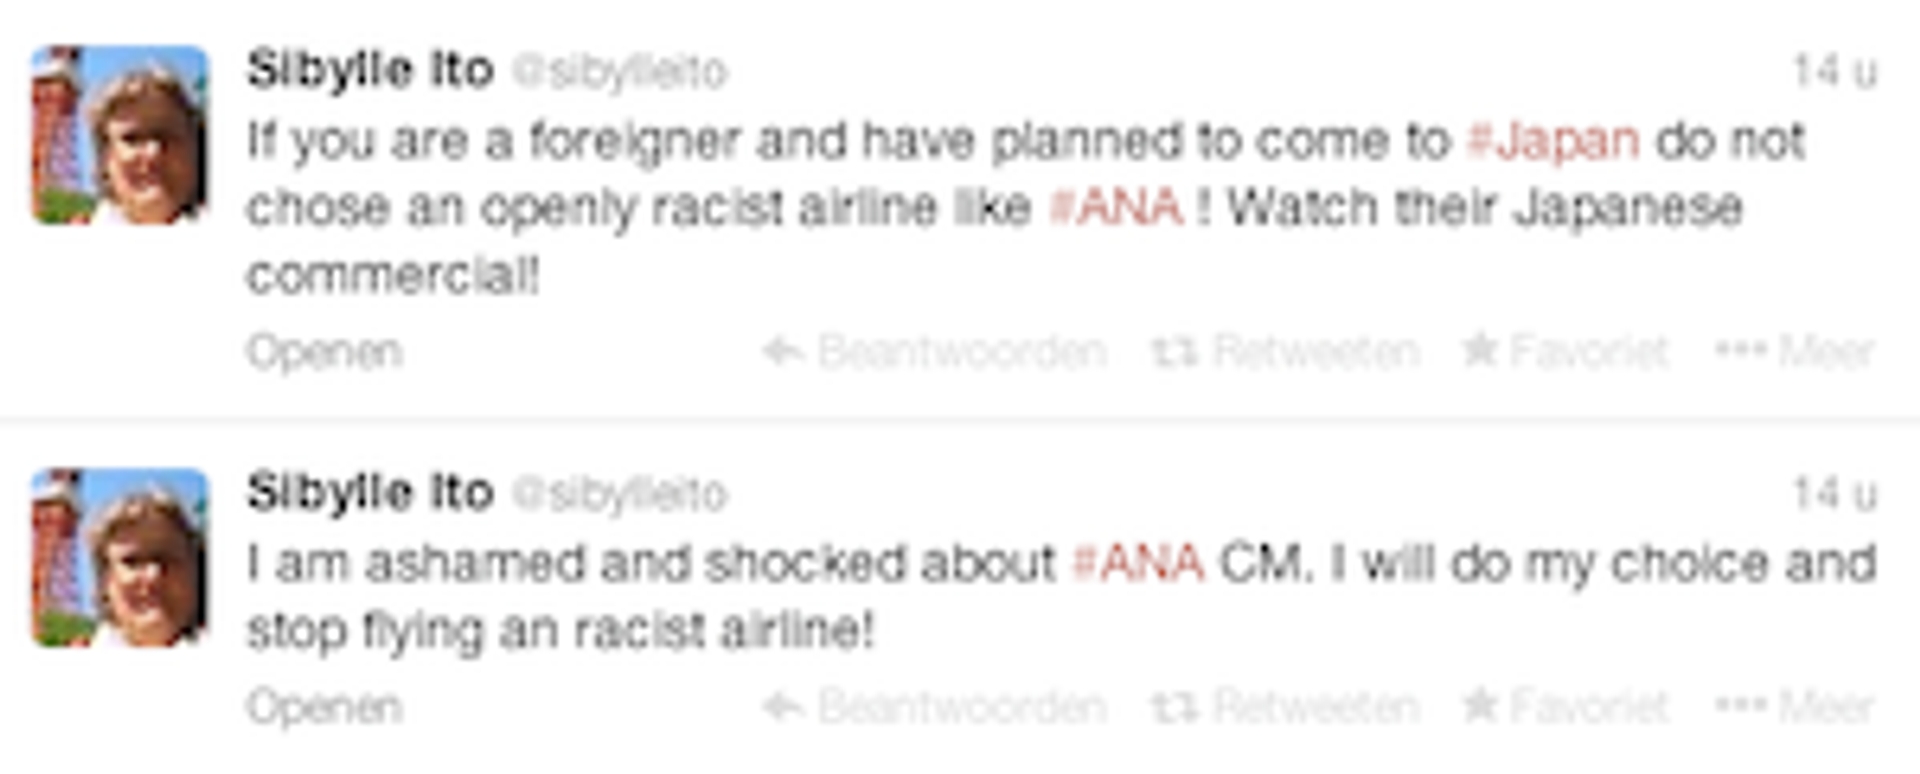 RTEmagicC_twitter_japanse_airline.png